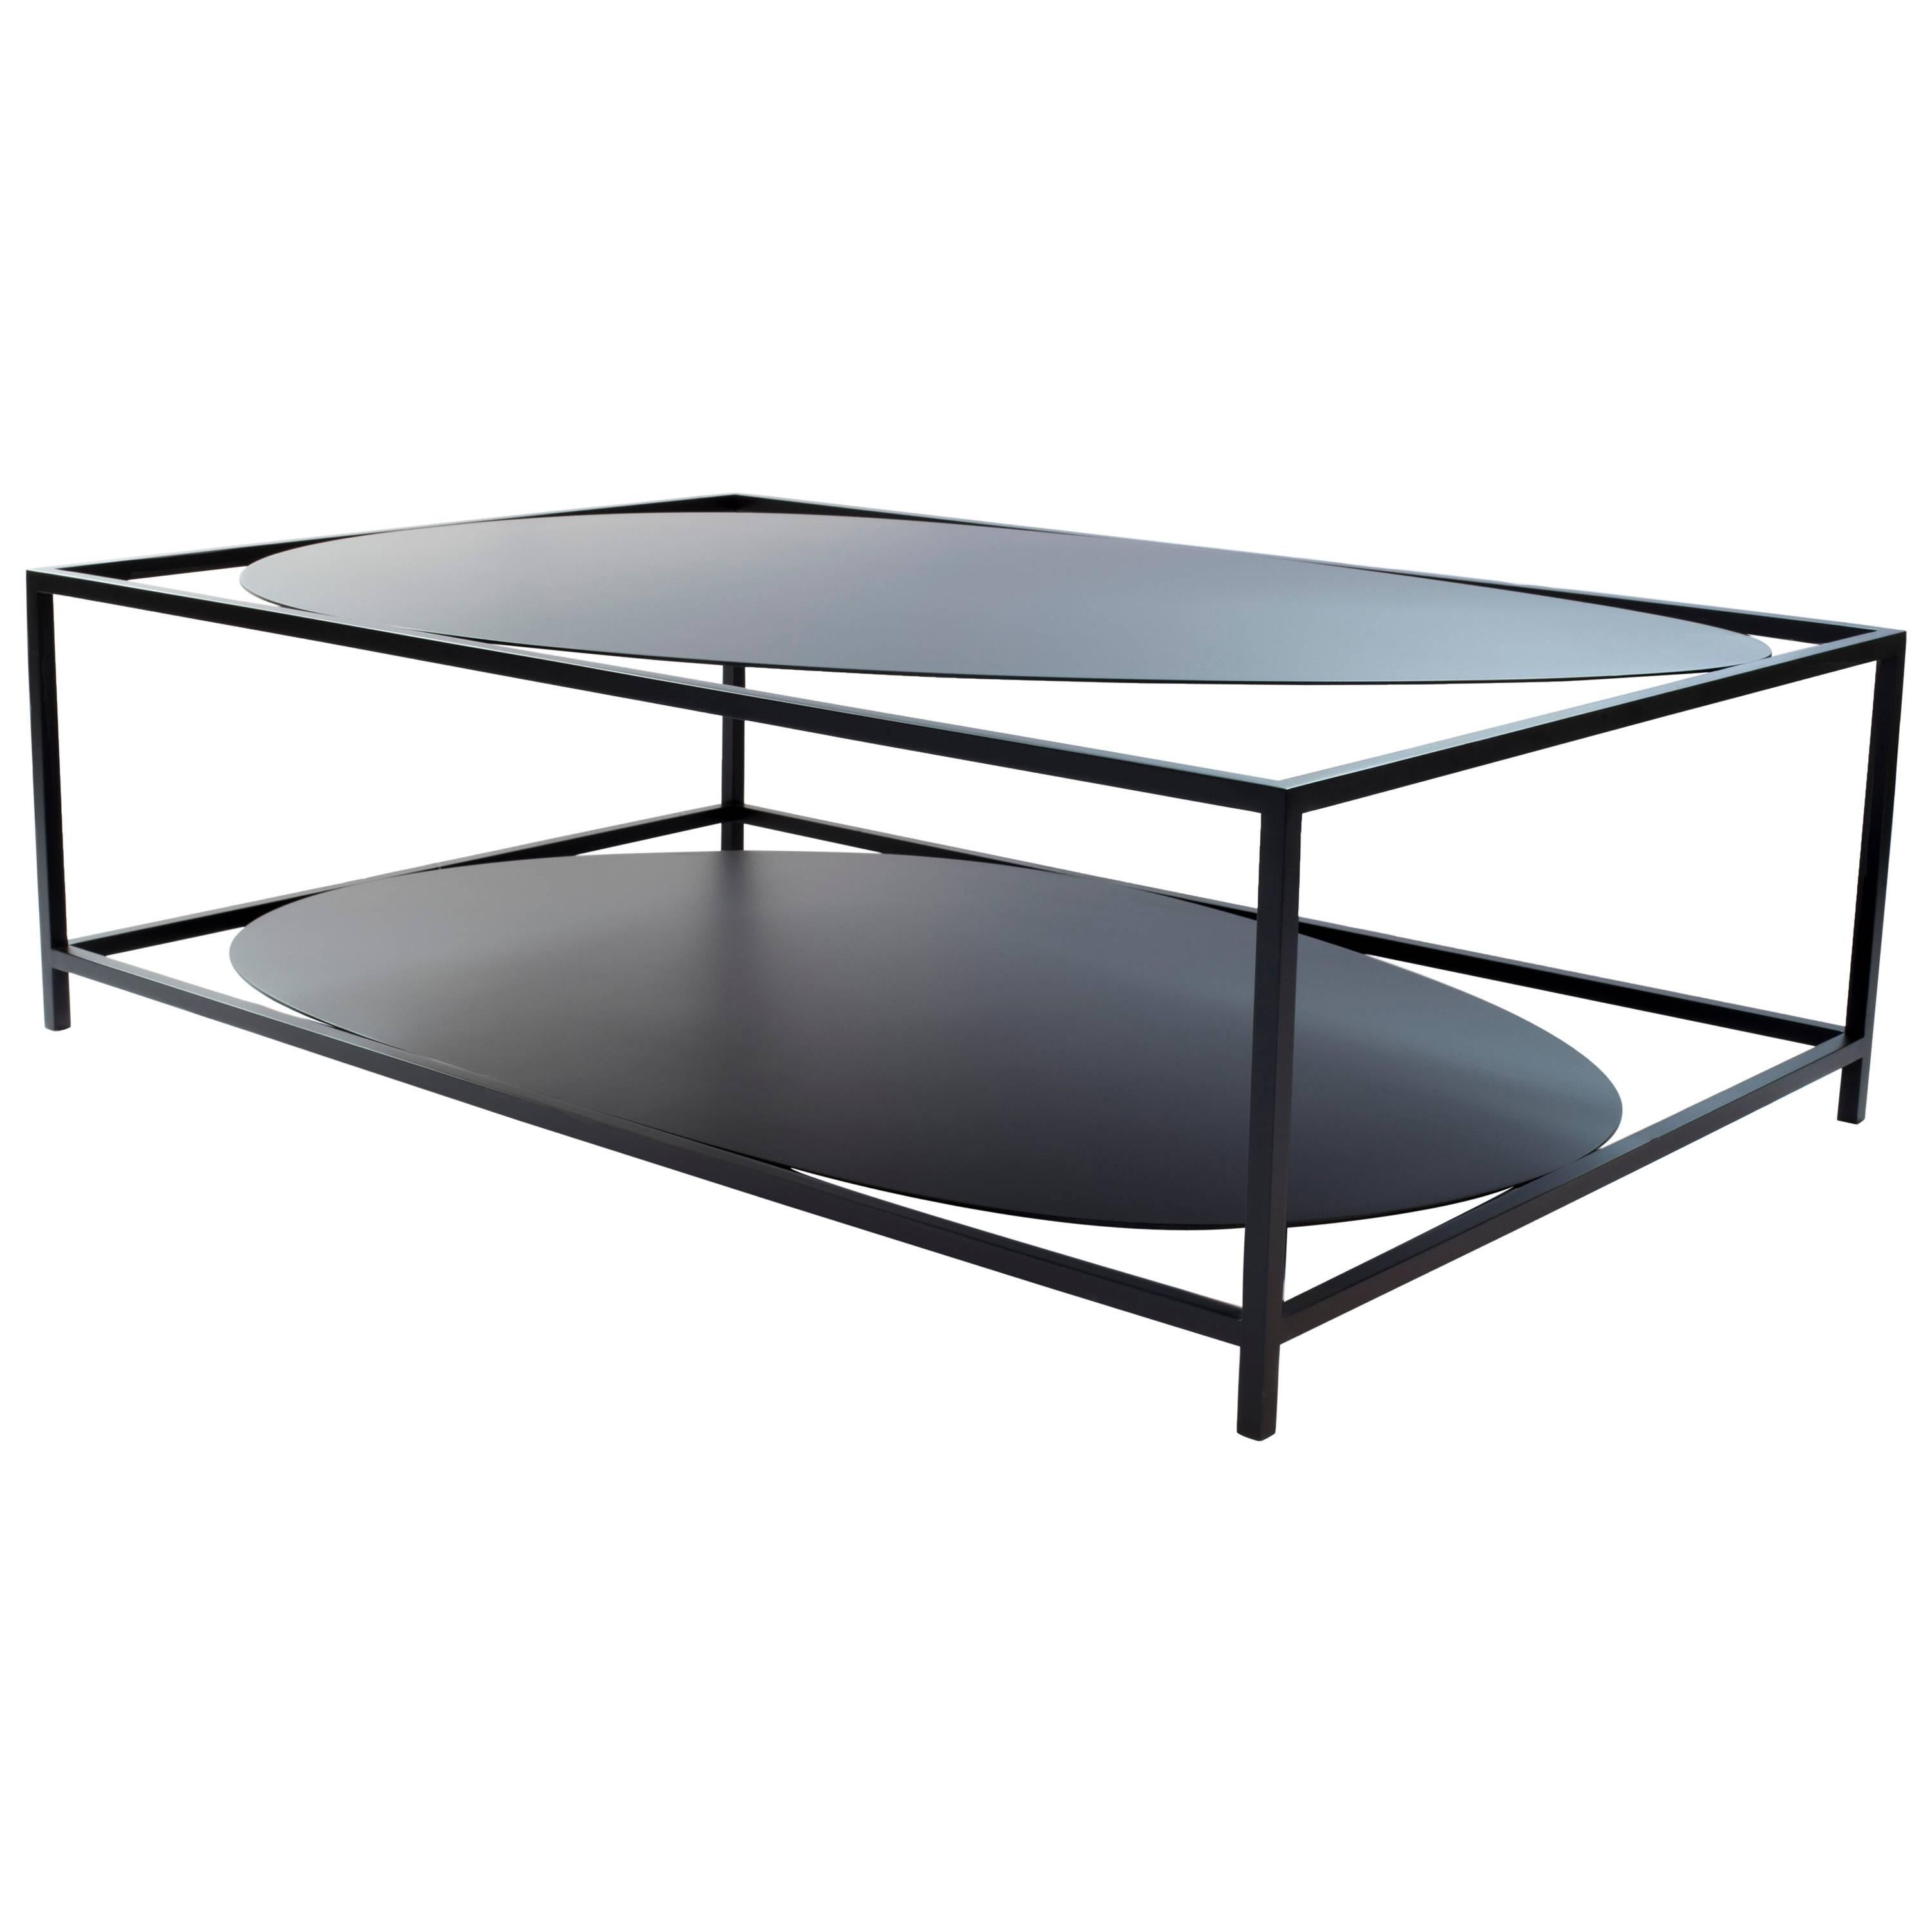 Contemporary minimal hand-painted steel Ahn organic-geometric steel minimal coffee tables is a study in positive and negative space. The sculptural Ahn coffee table is ever changing depending on how it is positioned and viewed in a room. With its